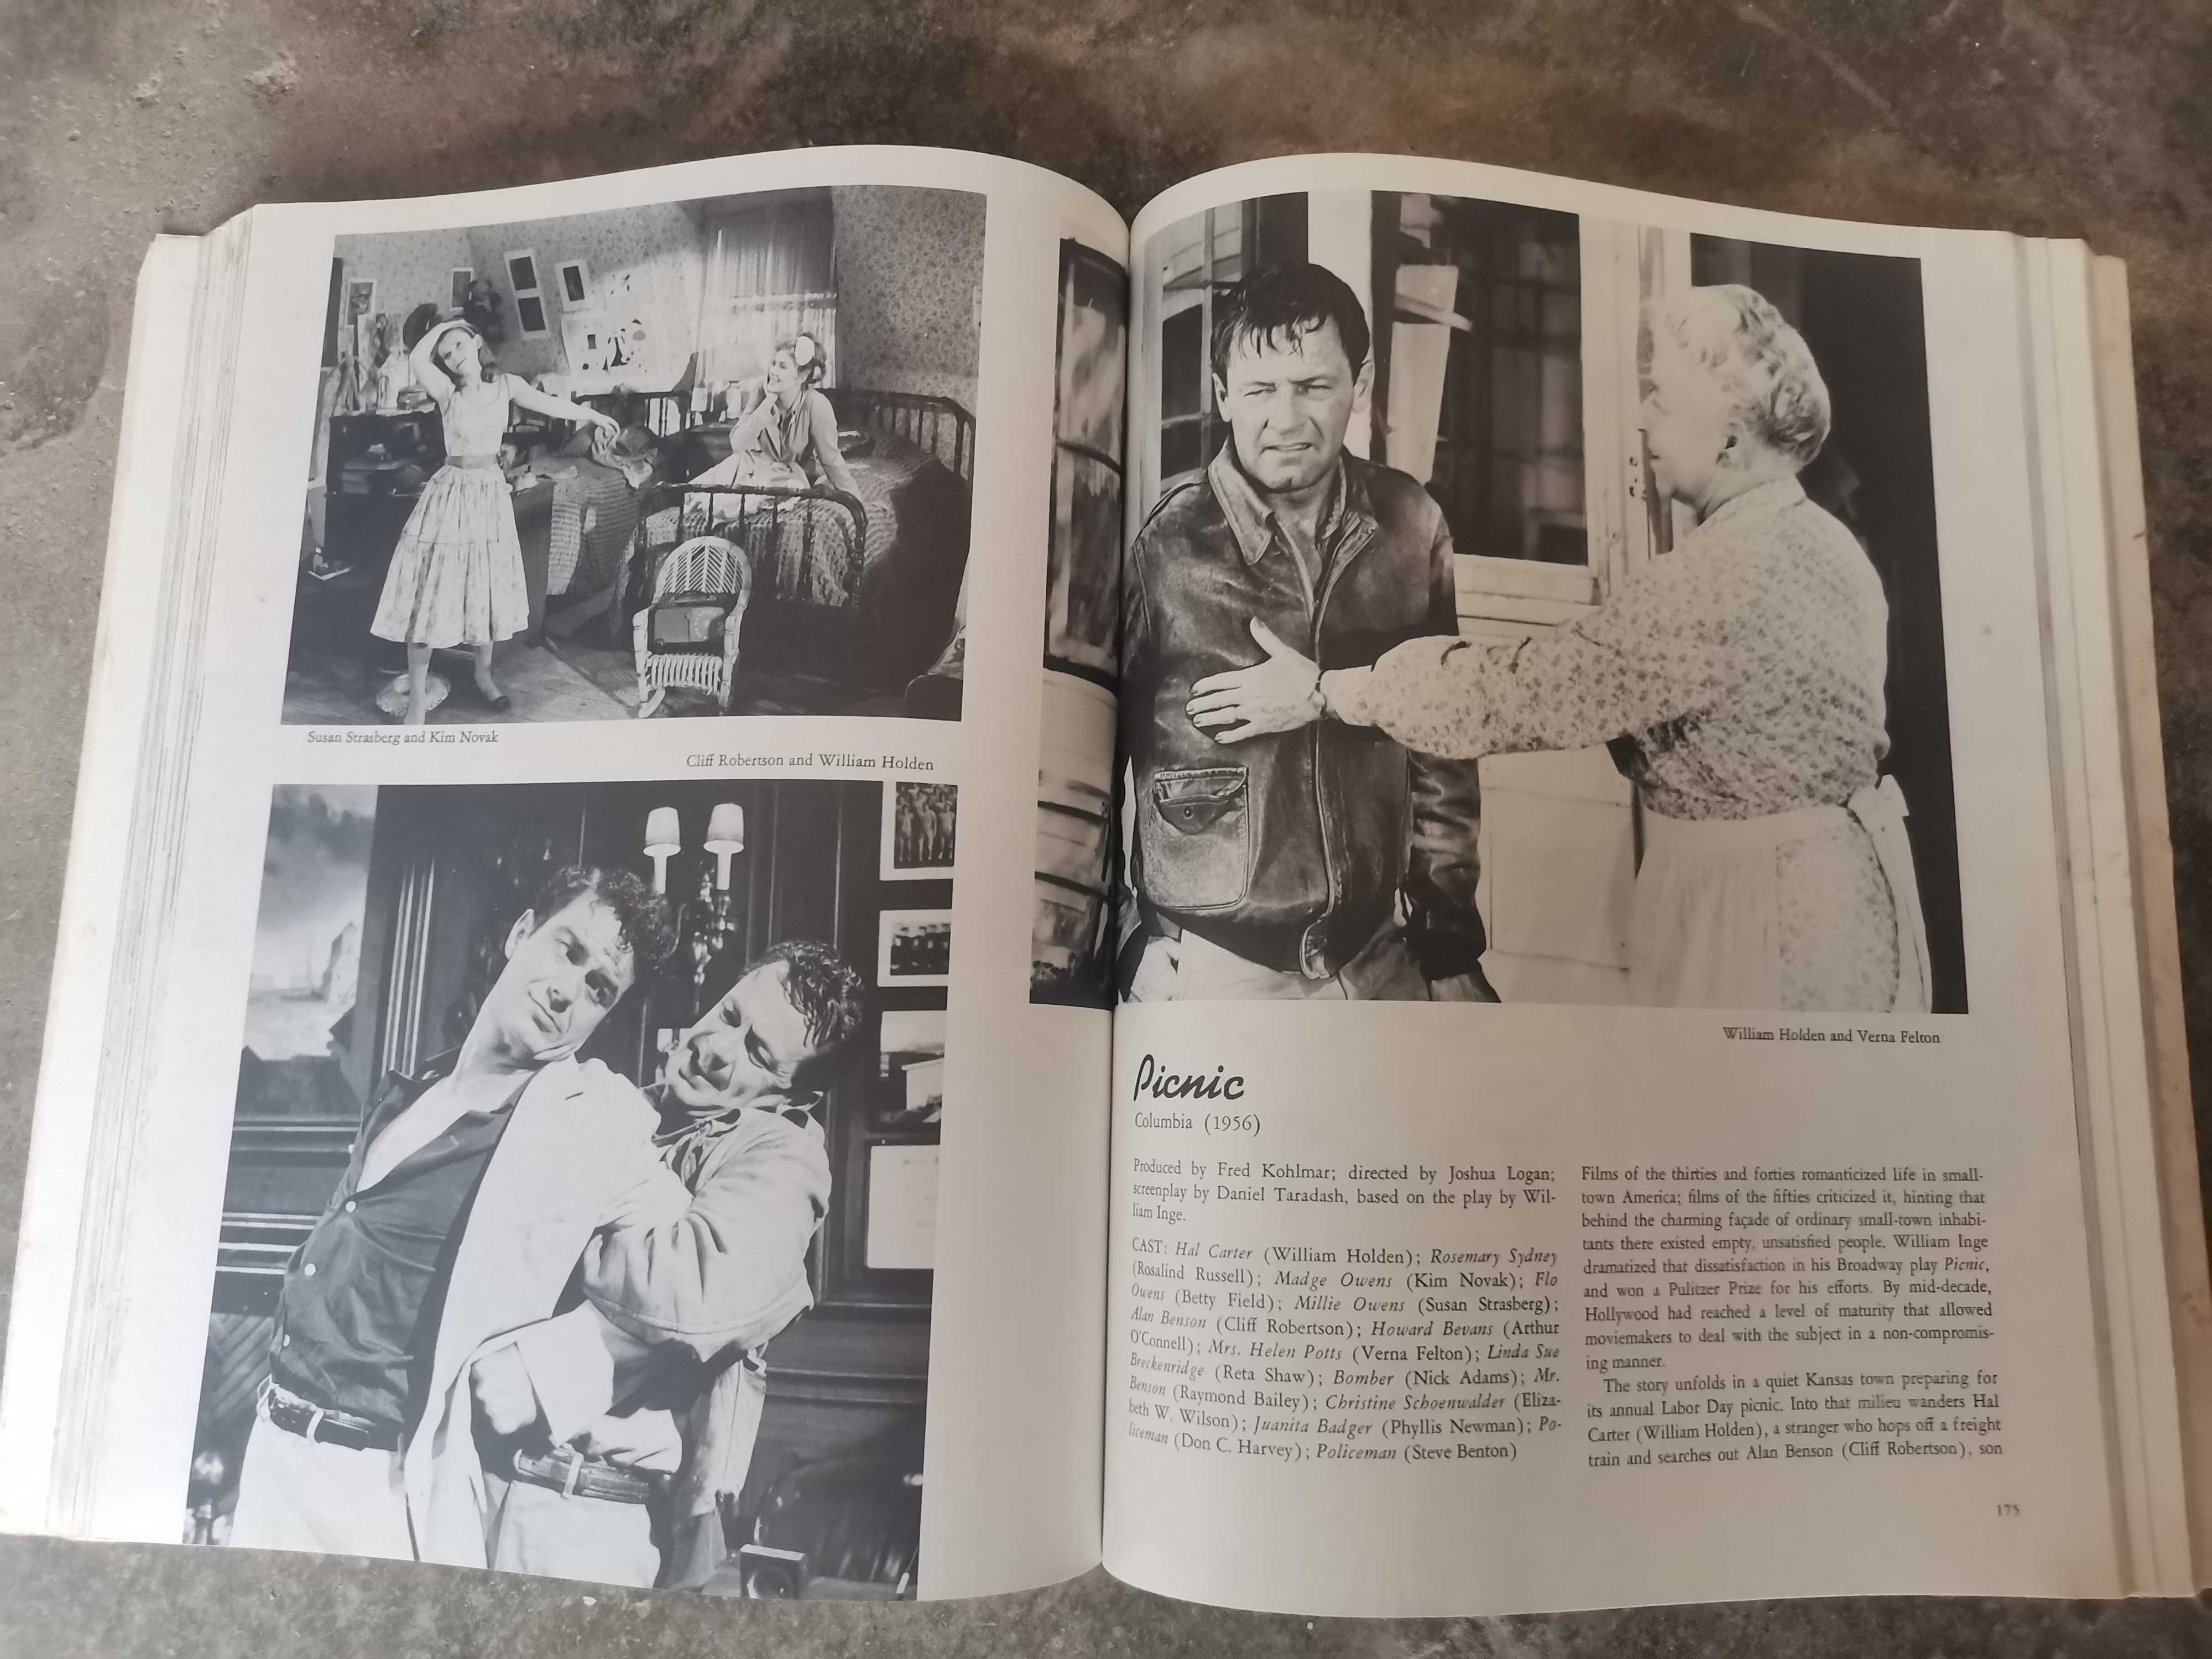 Livro The films of the Fifties